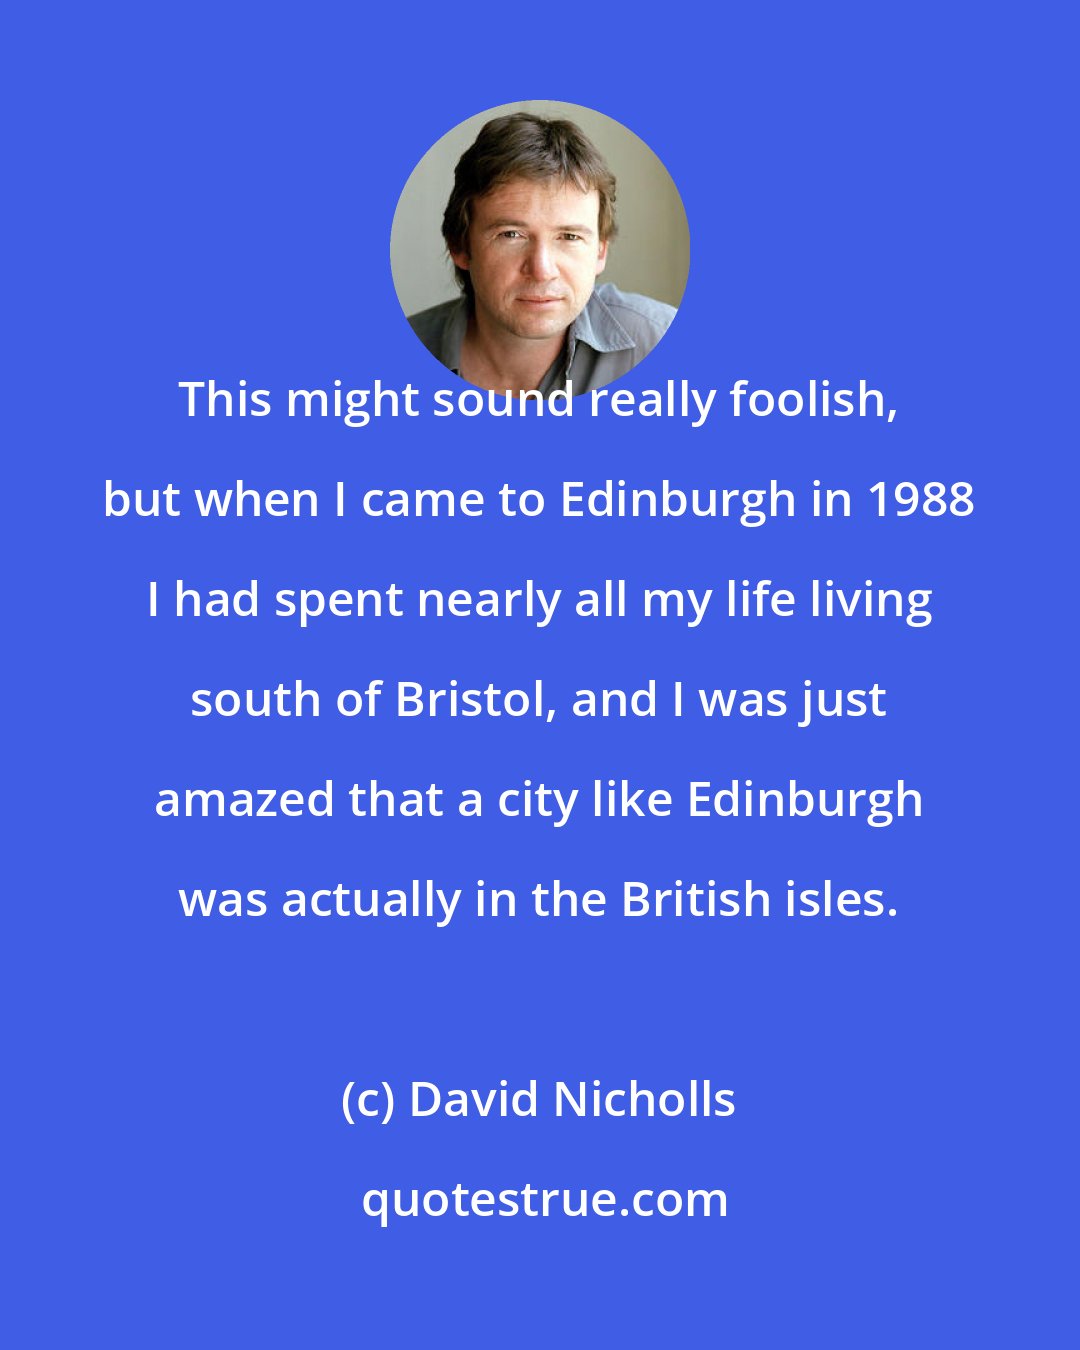 David Nicholls: This might sound really foolish, but when I came to Edinburgh in 1988 I had spent nearly all my life living south of Bristol, and I was just amazed that a city like Edinburgh was actually in the British isles.